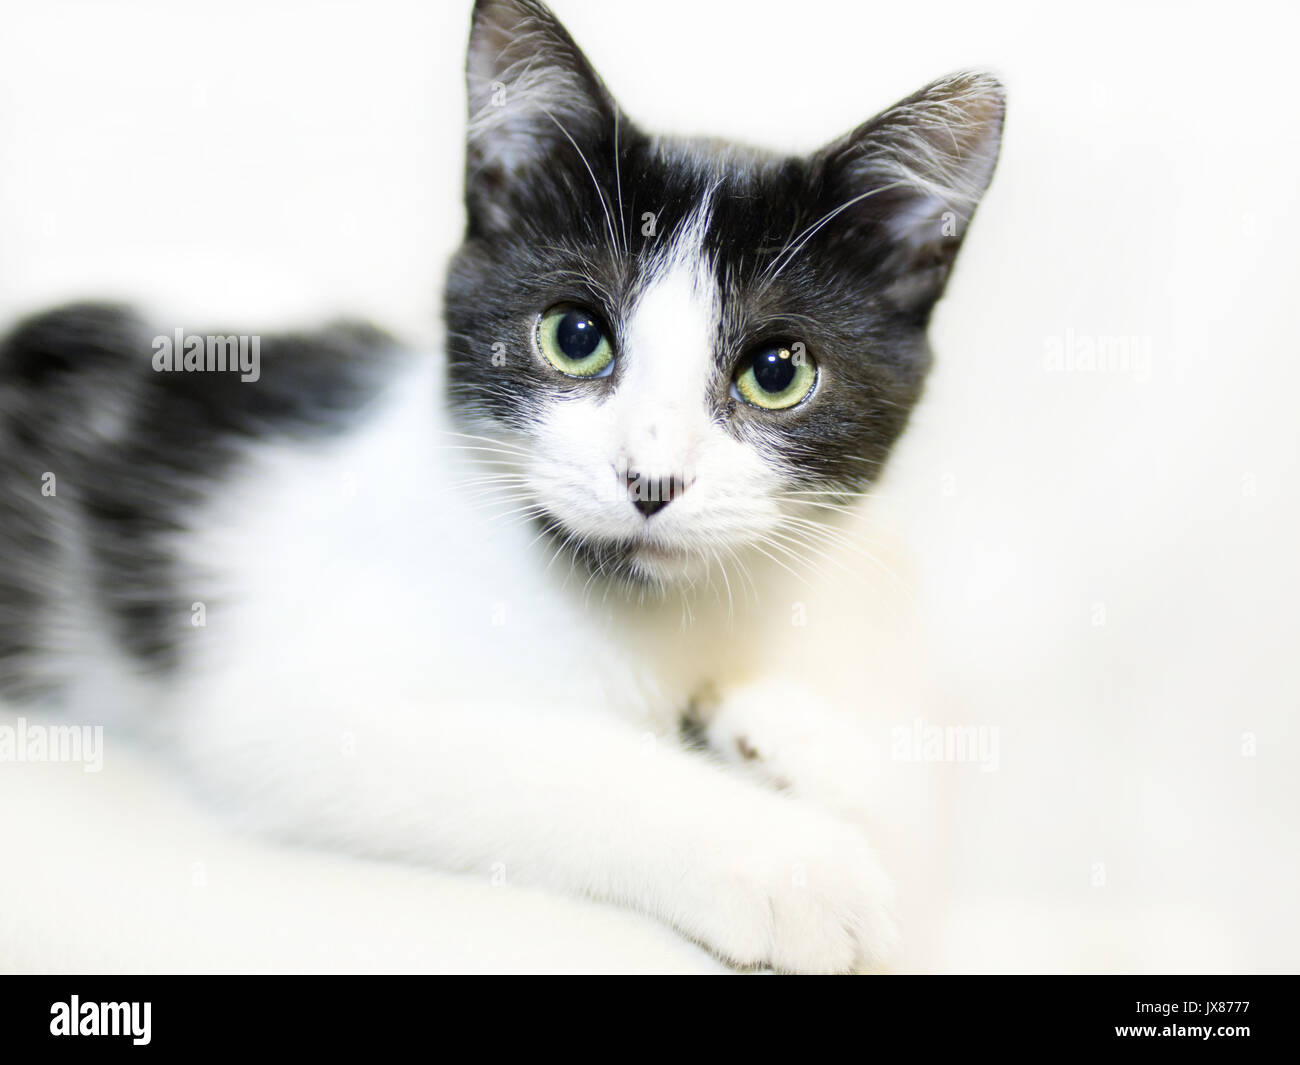 Cute Black And White Cats With Green Eyes